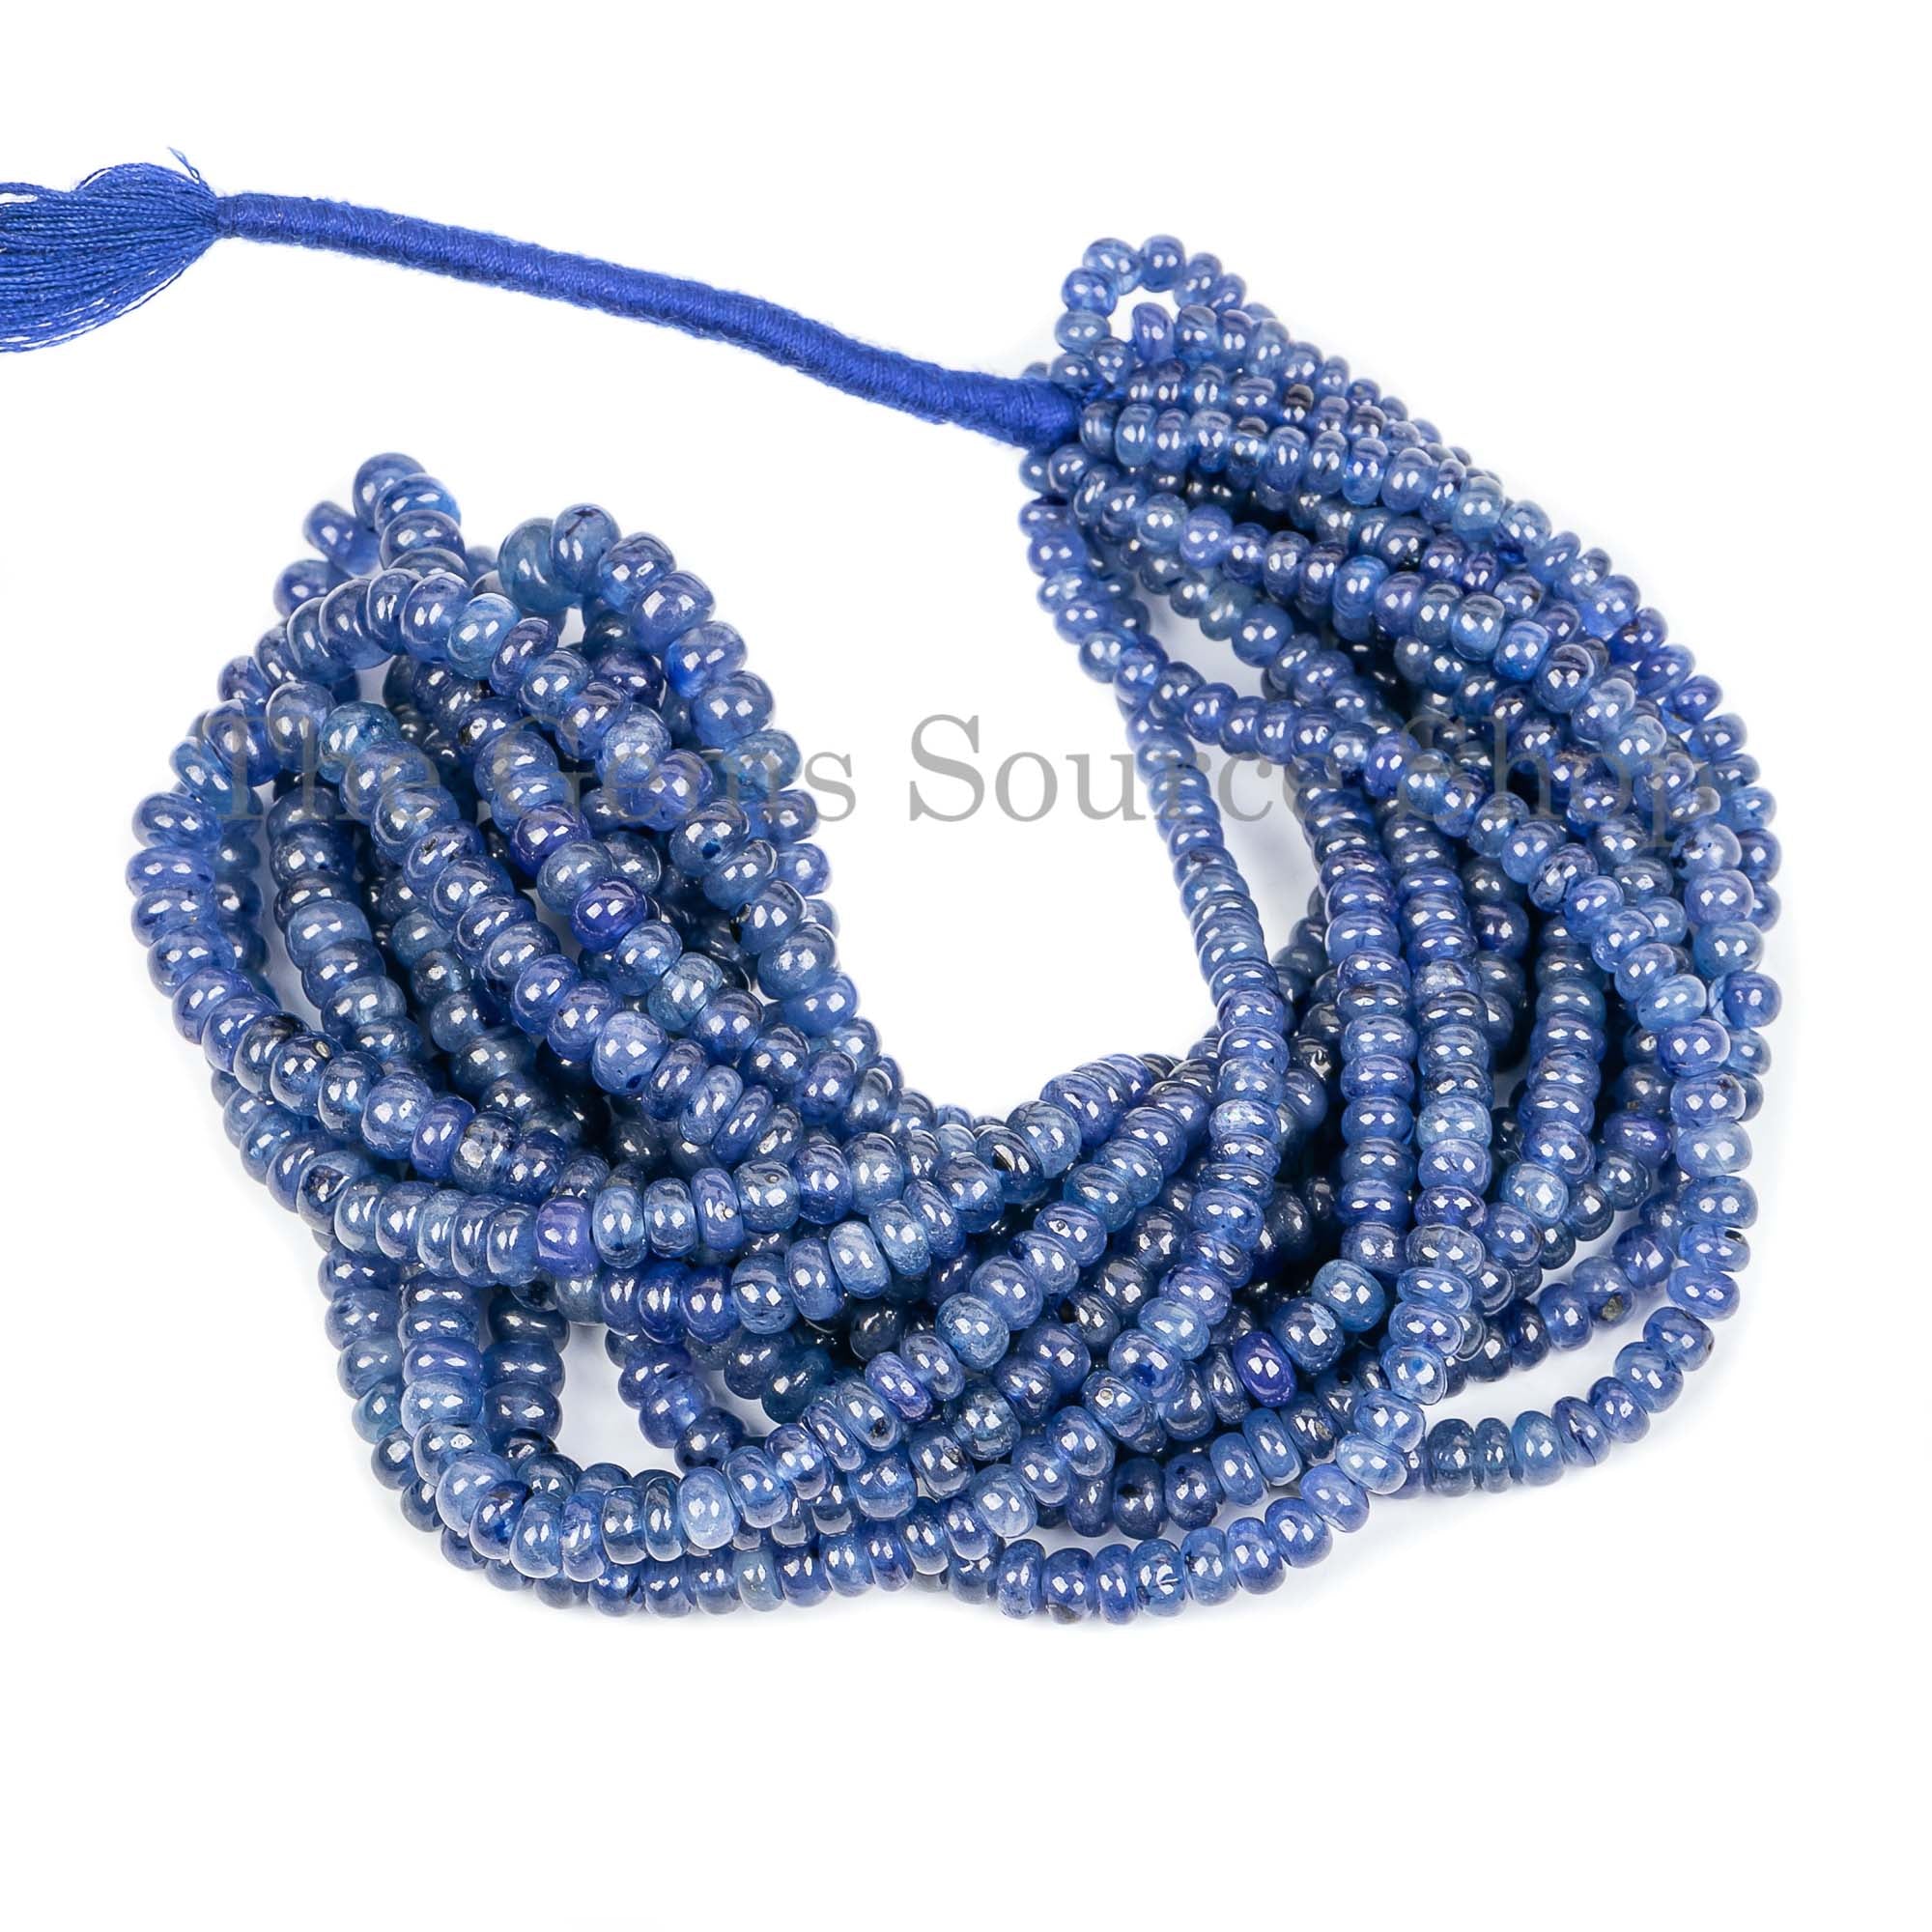 Natural Blue Sapphire Beads, Sapphire Smooth Rondelle Beads, Plain Blue Sapphire Beads